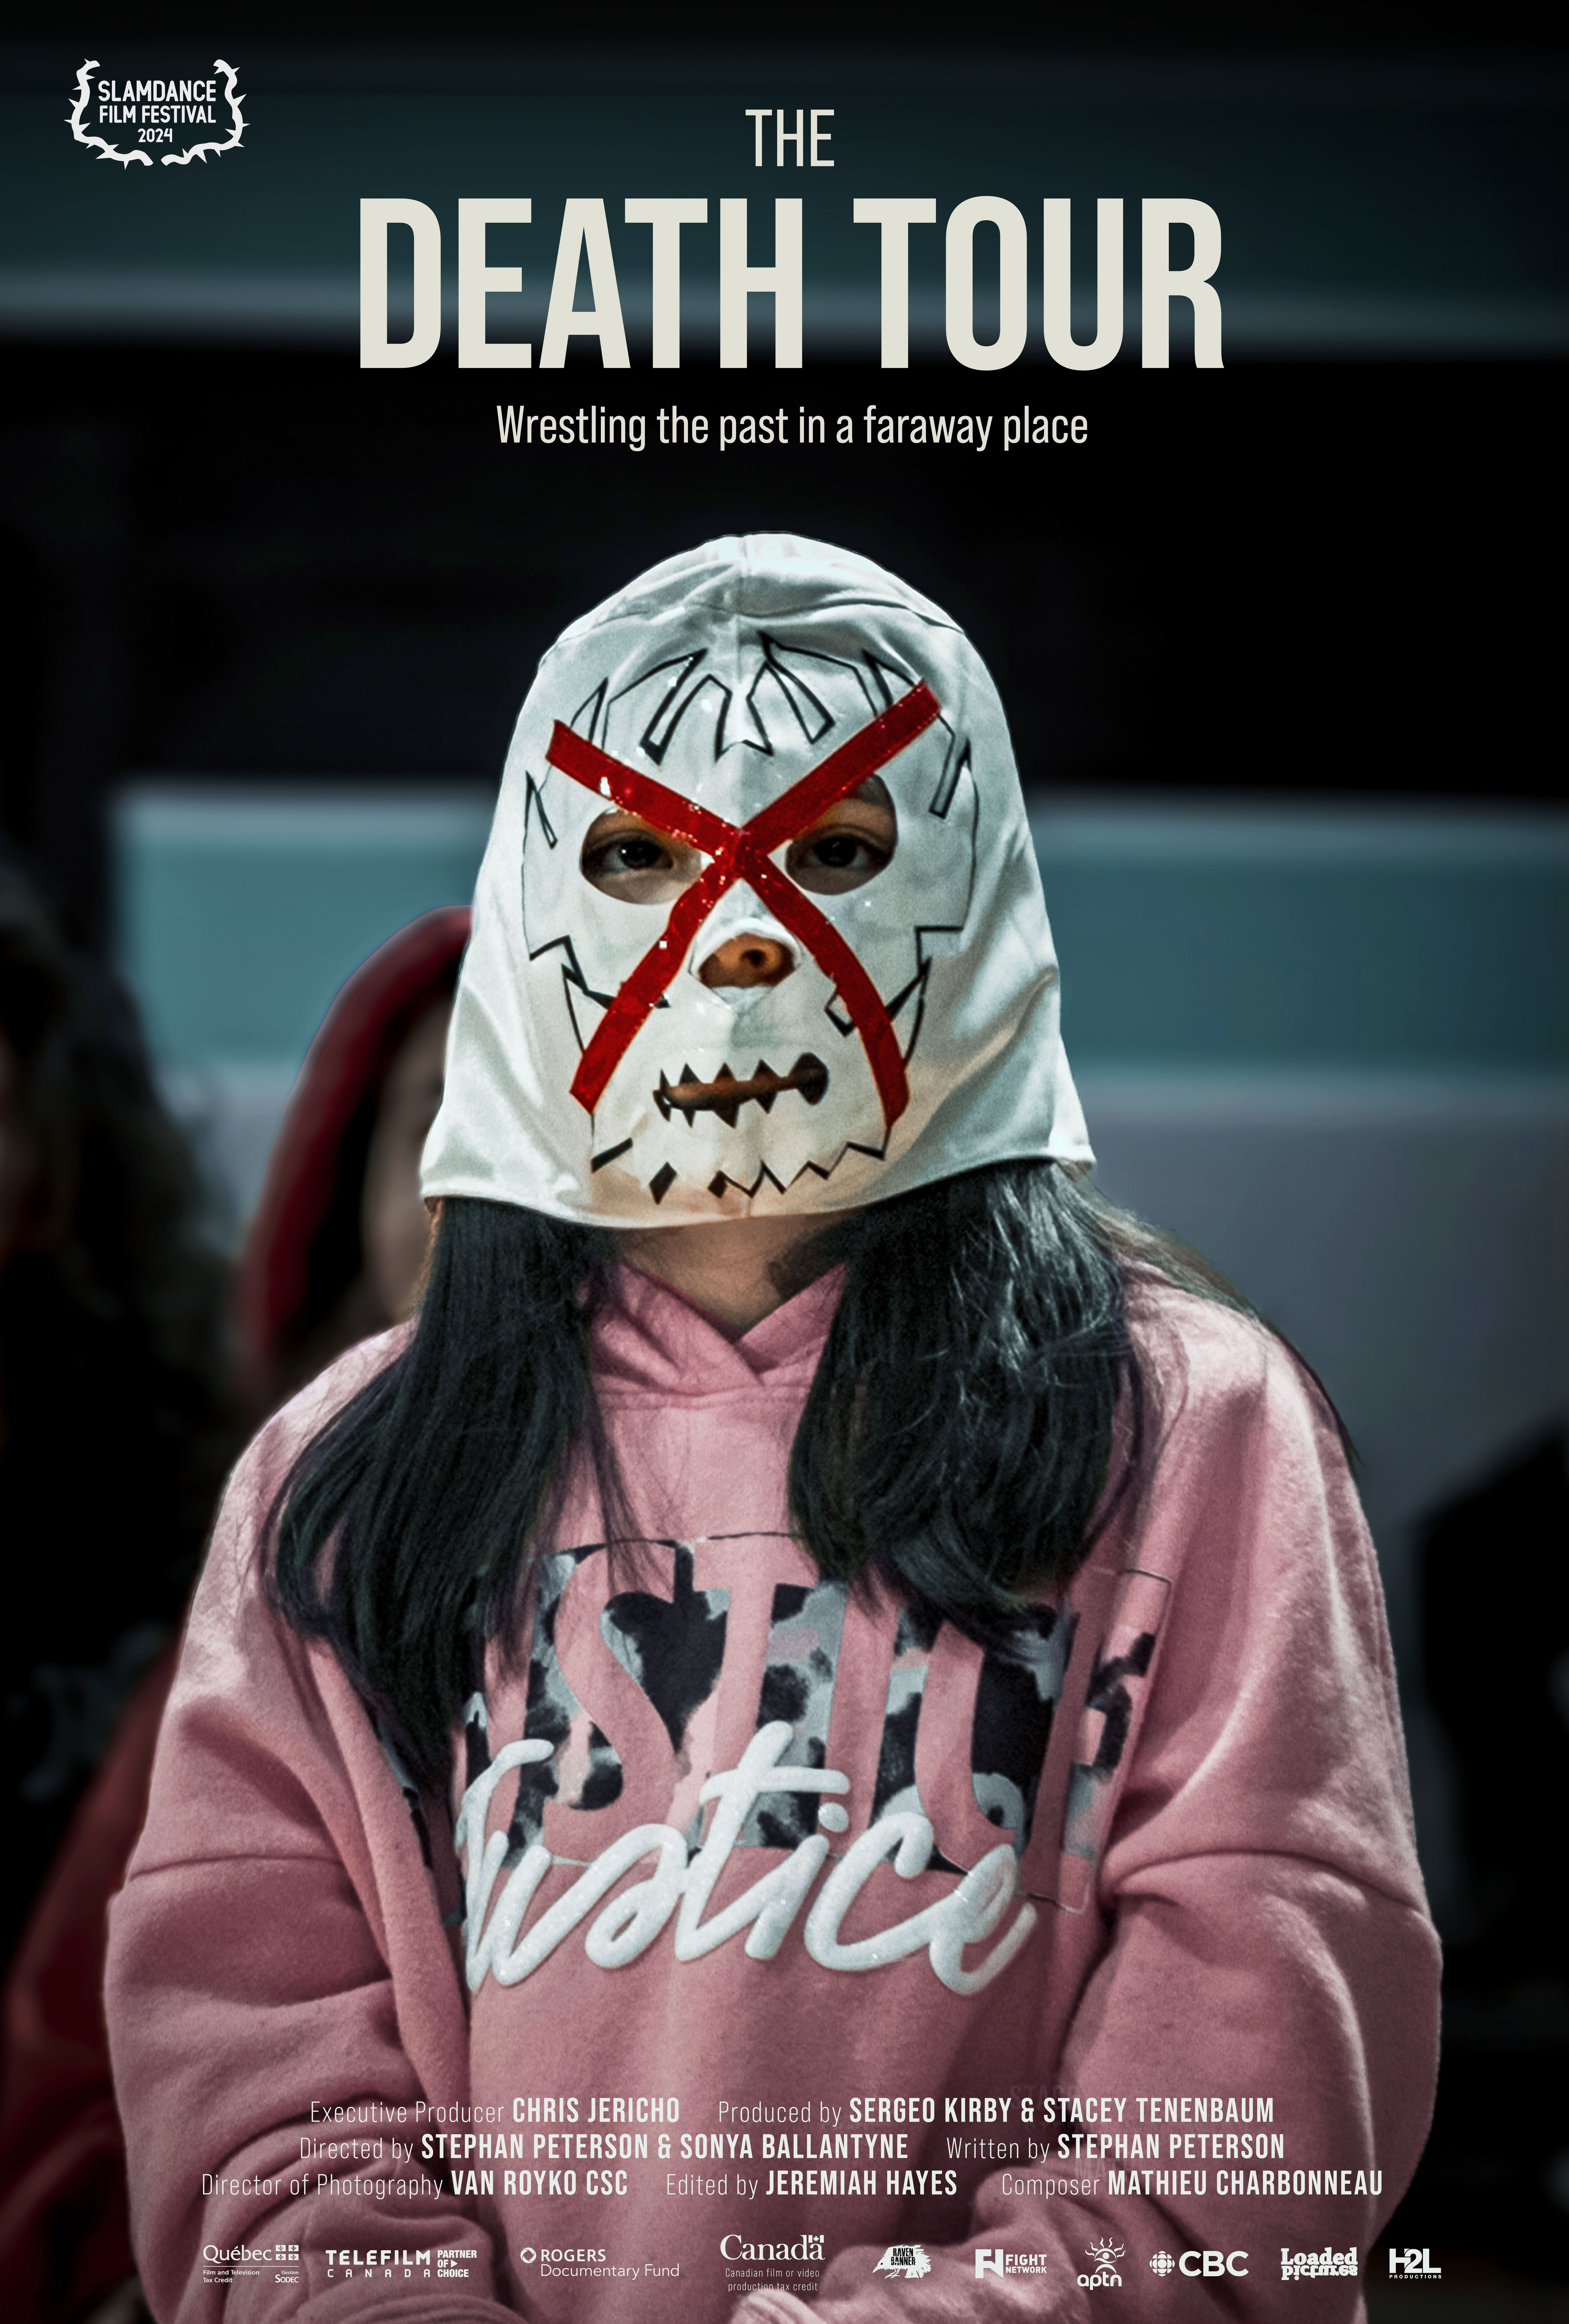 A poster of a young girl wearing a wrestling mask in The Death Tour.